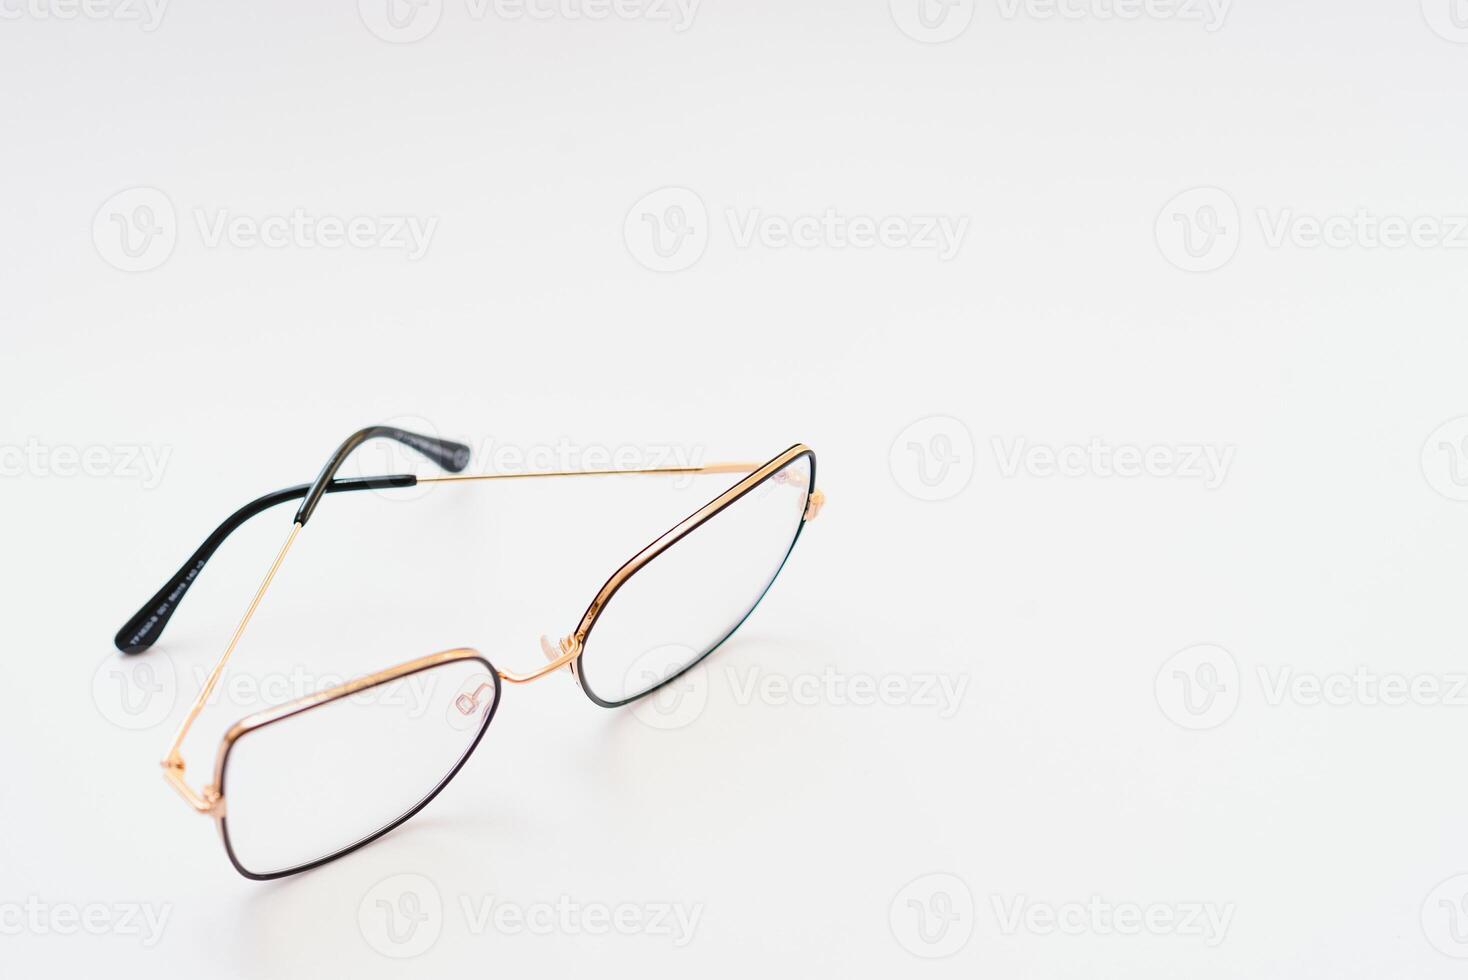 isolation glasses on white background. black and white combination oval eyeglass frames. oval eye glasses frame in the photo from above on a white background